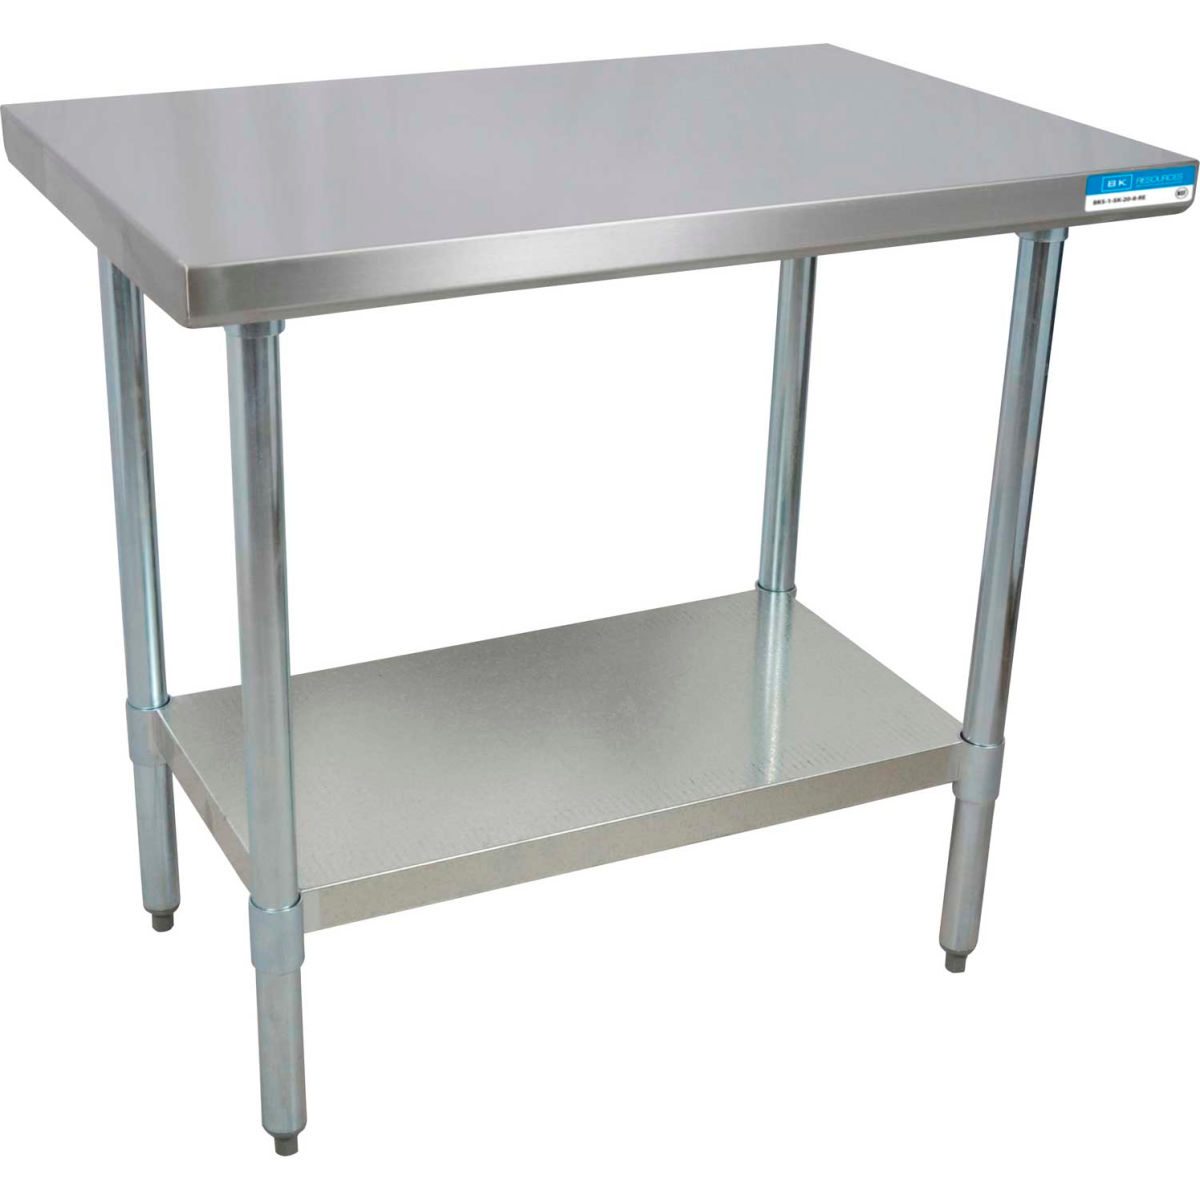 Picture of BK Resources B0899461 18 Gauge 430 Series Stainless & Galvanised Shelf Workbench with Undershelf - 72 x 18 in.